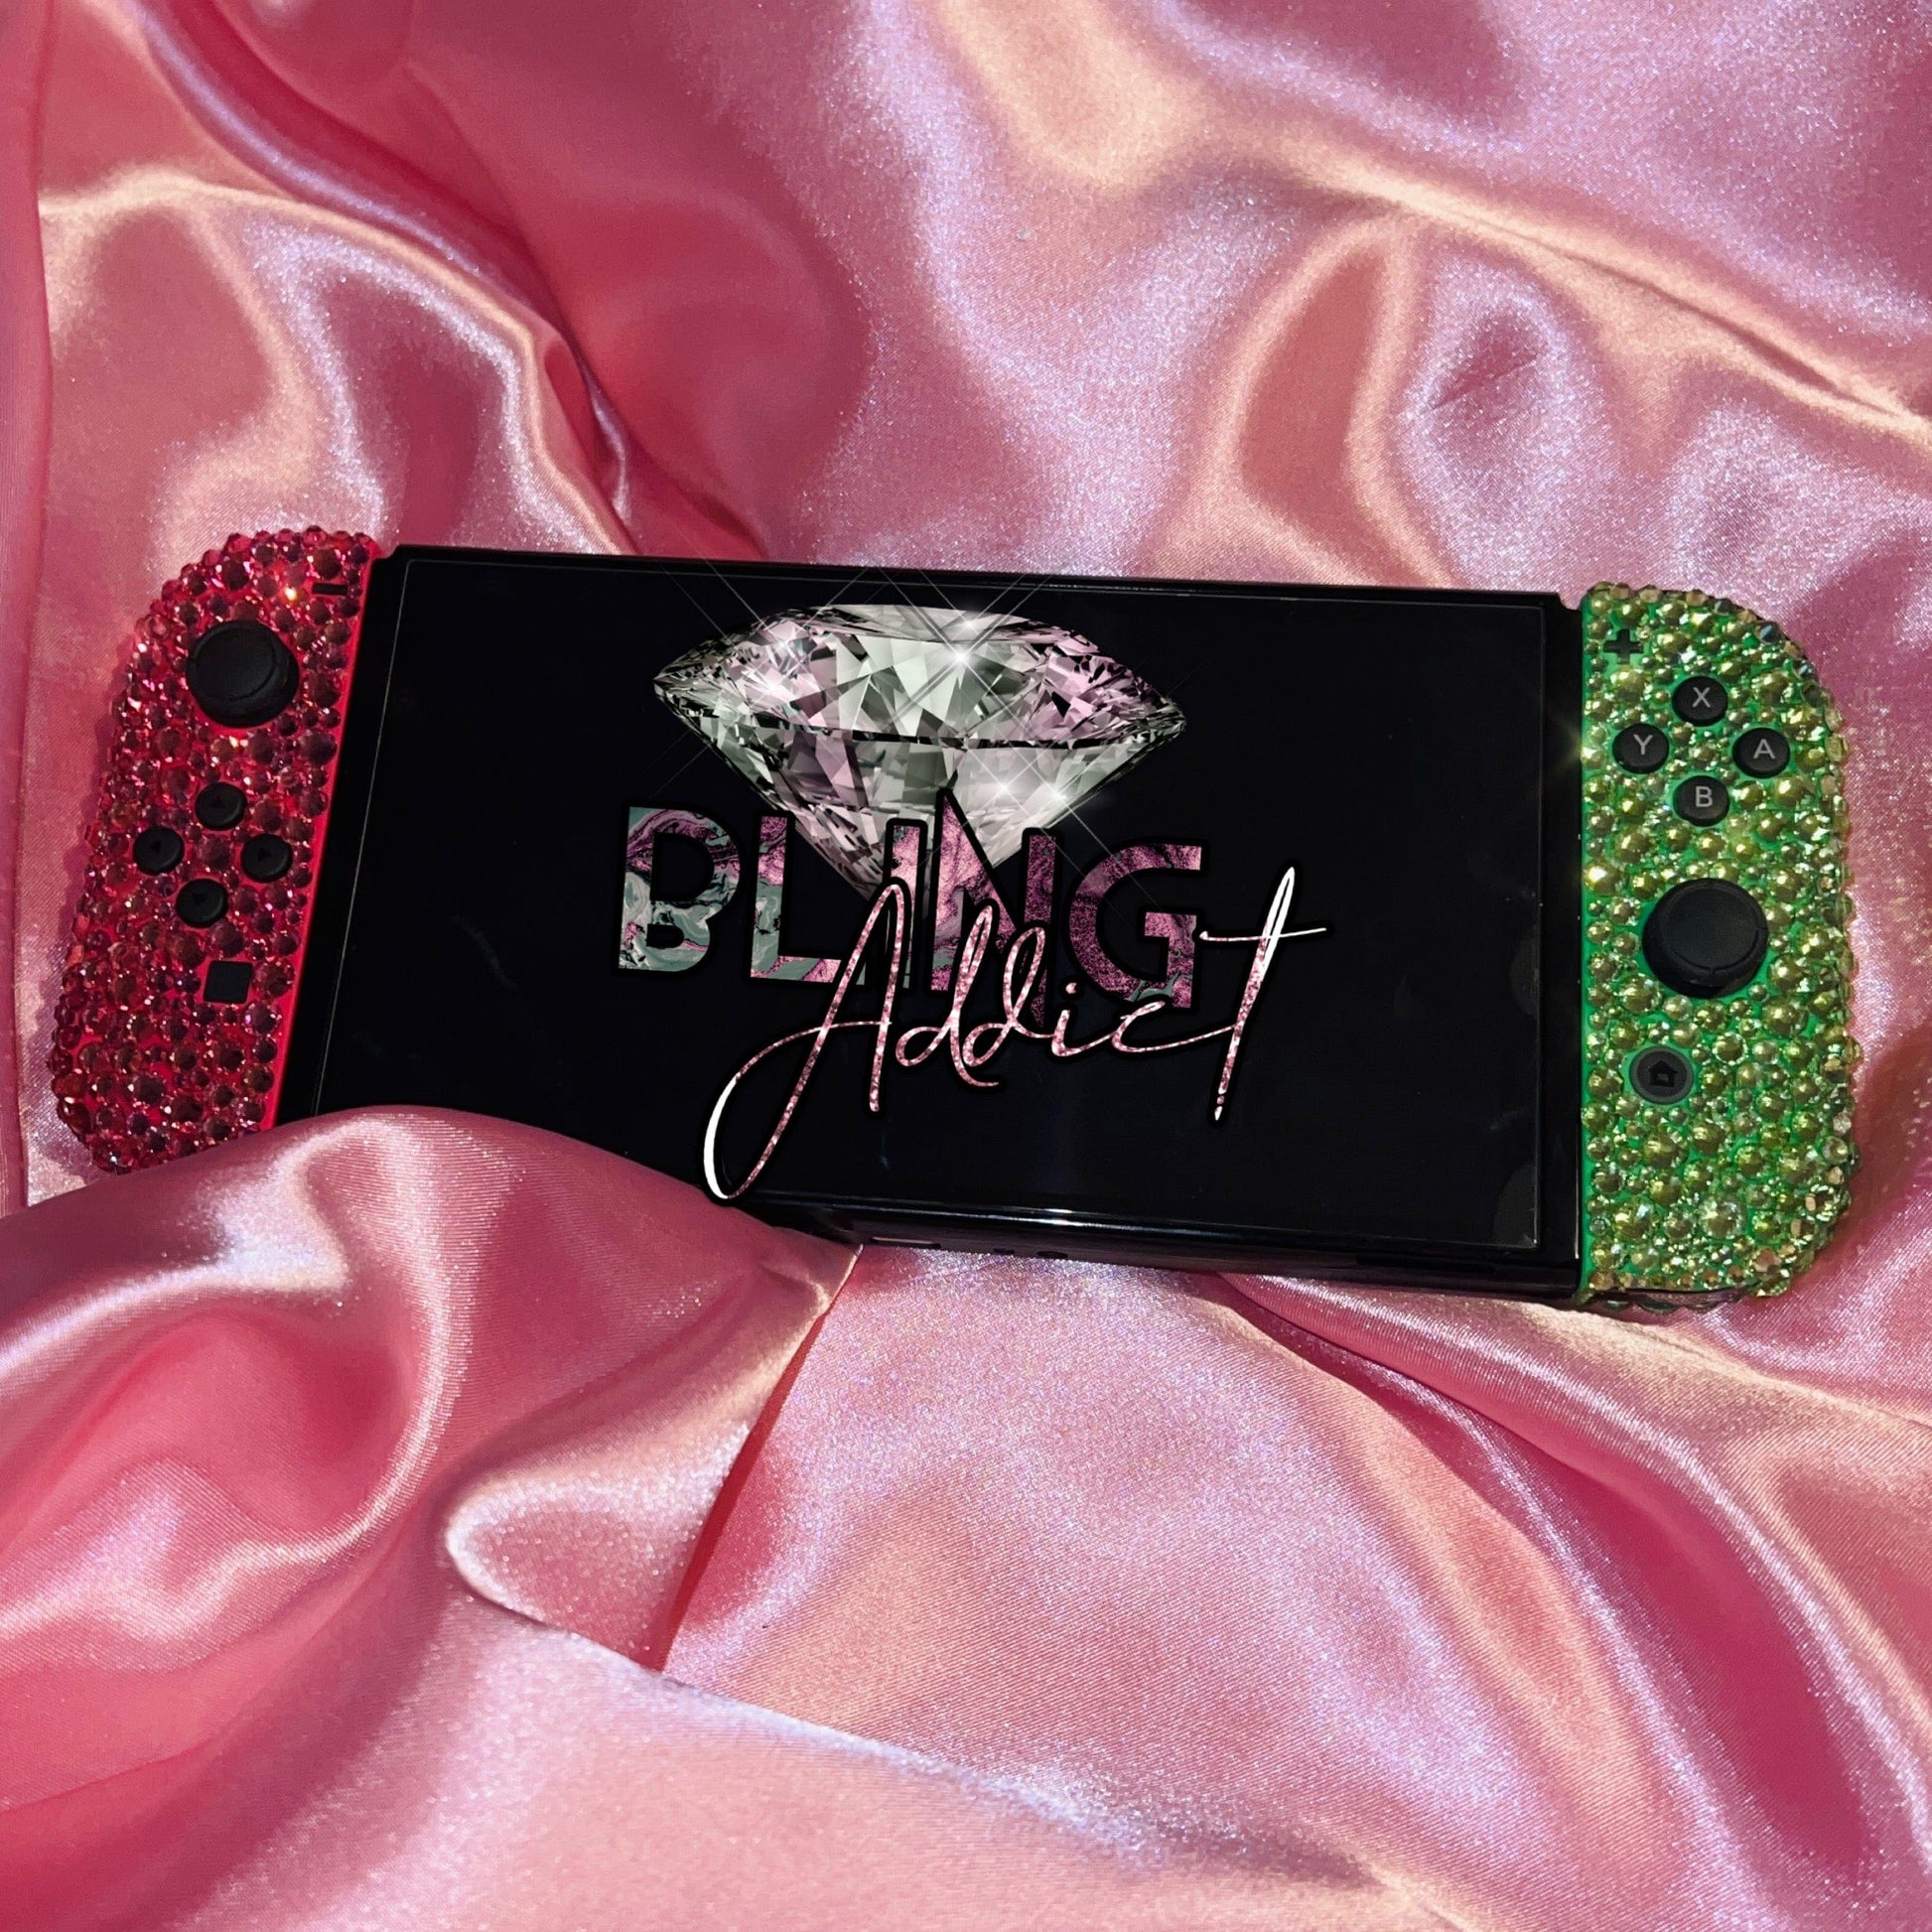 Crystallized Bling Nintendo Switch Joy-Con Controllers Pink & Green by Bling Addict | BlingxAddict